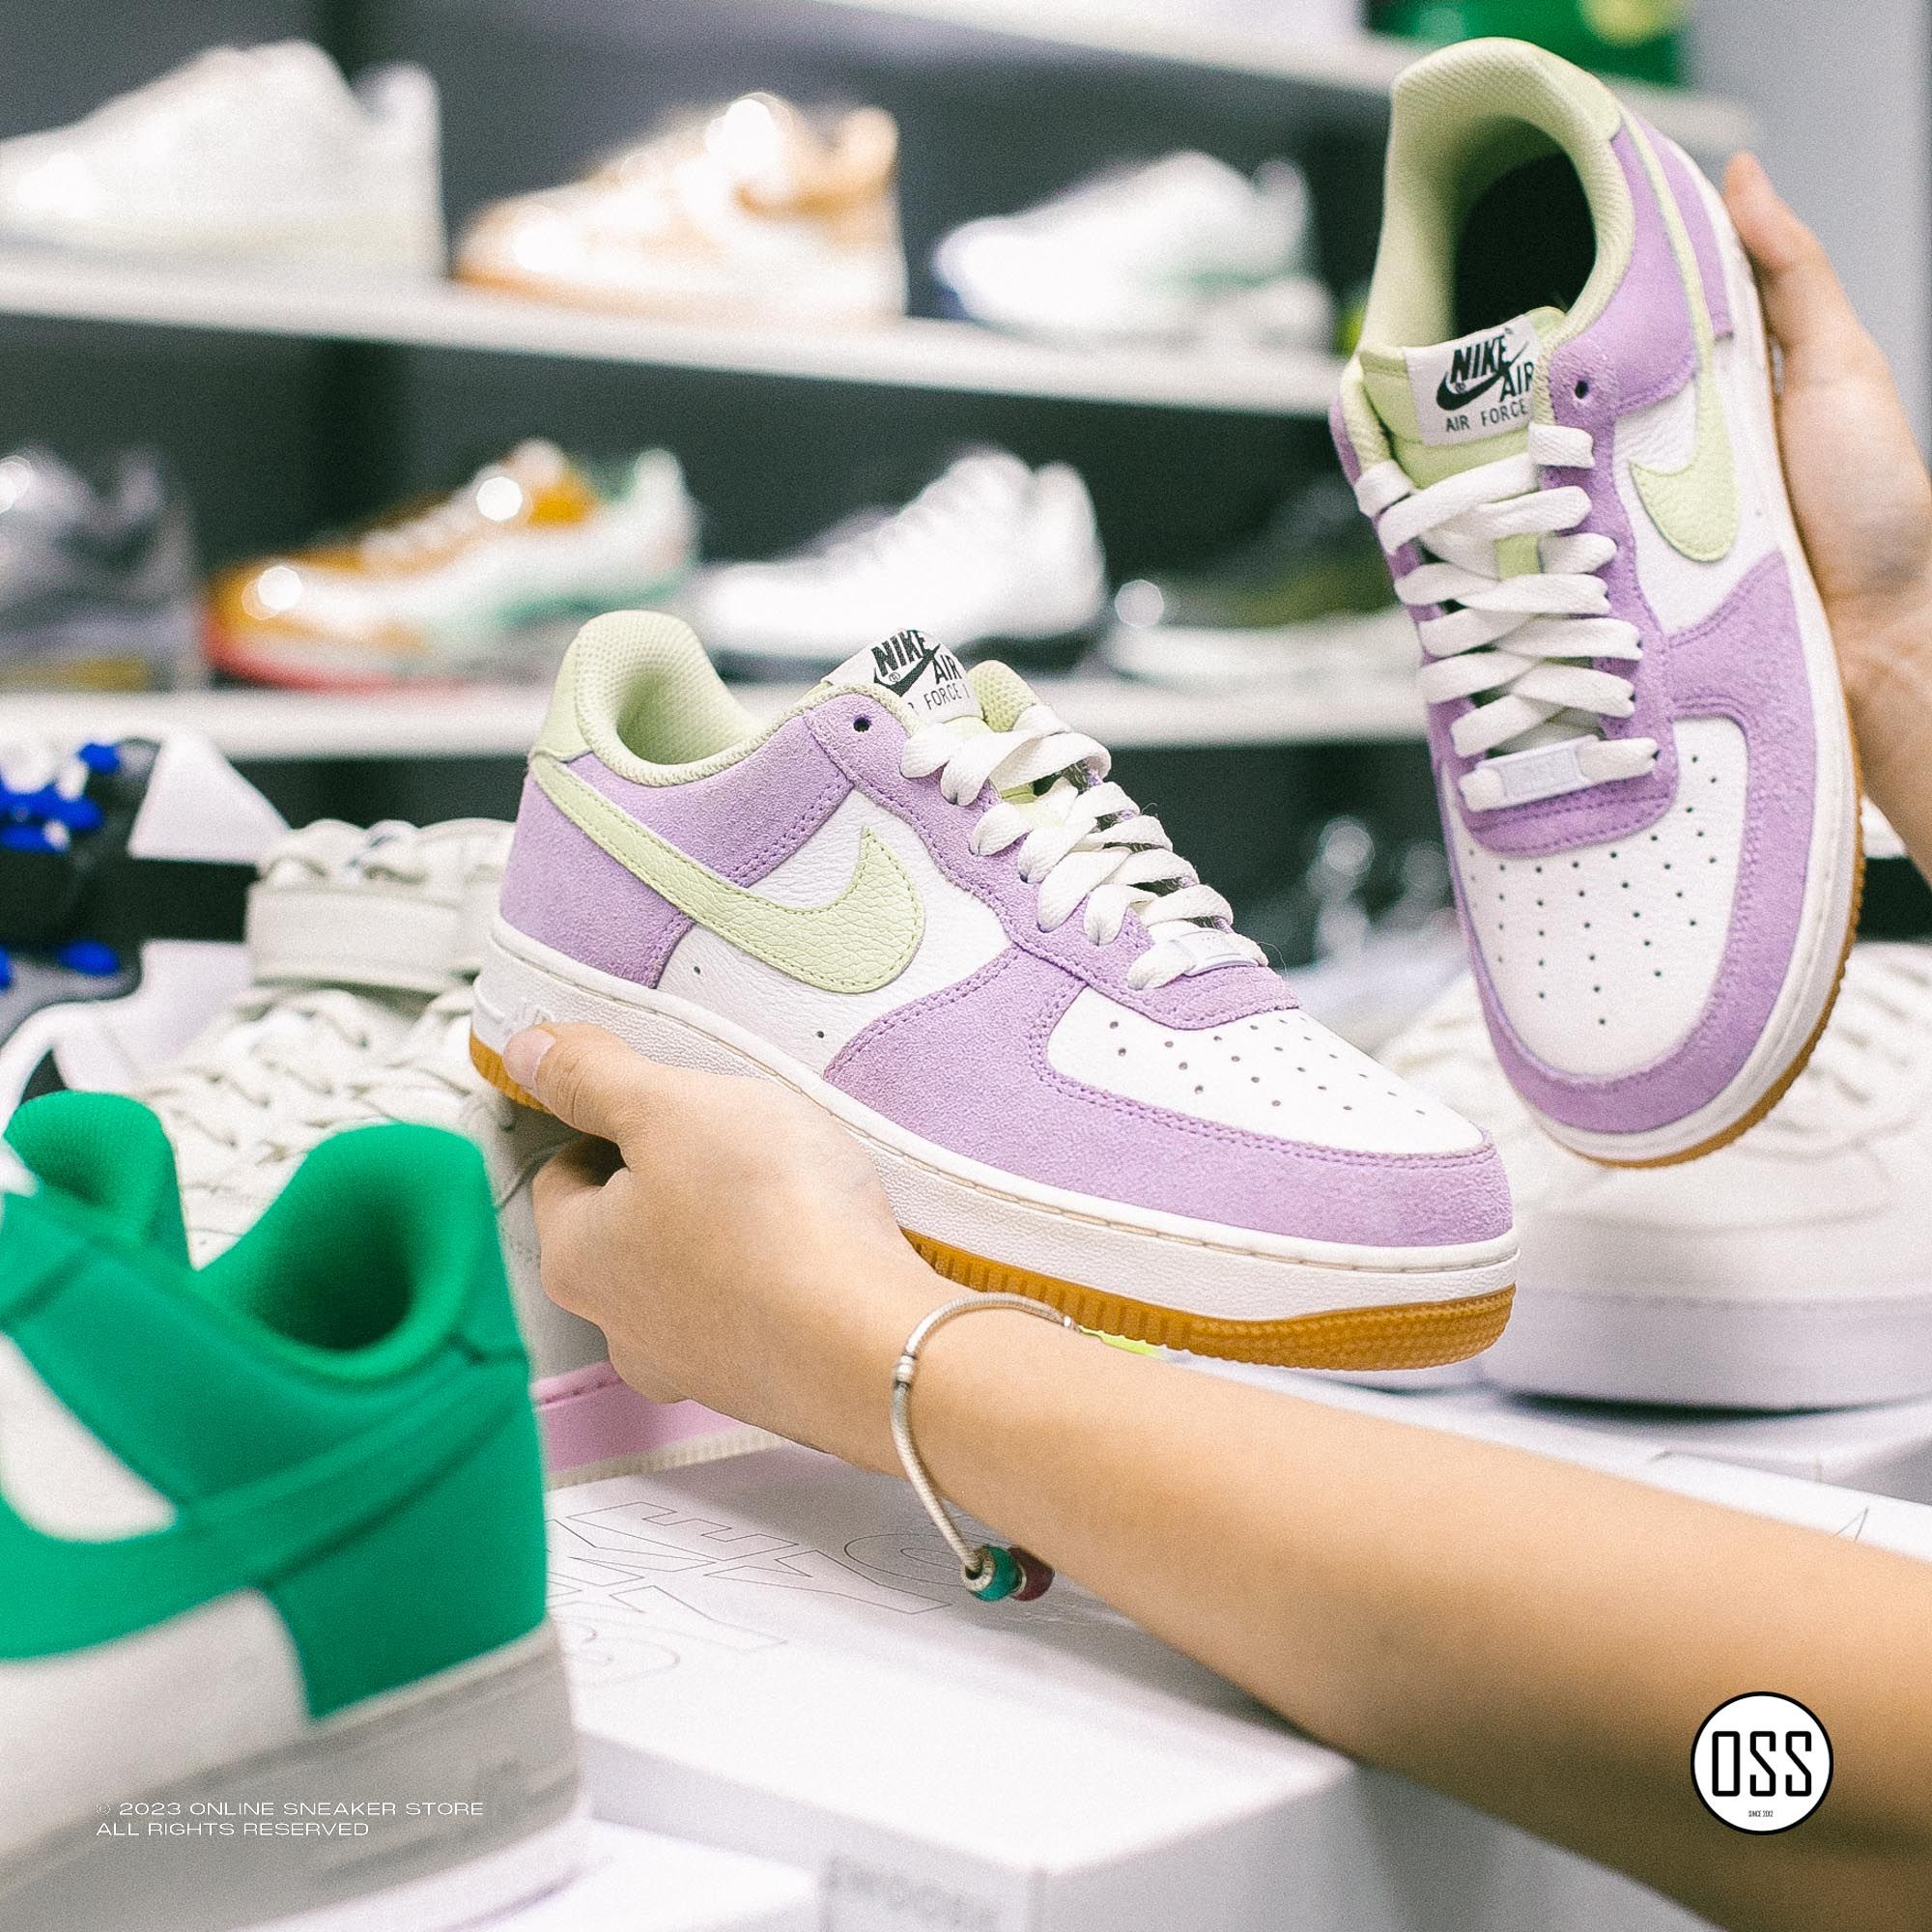  Nike Air Force 1 Low By You - Lilac Purple Suede 